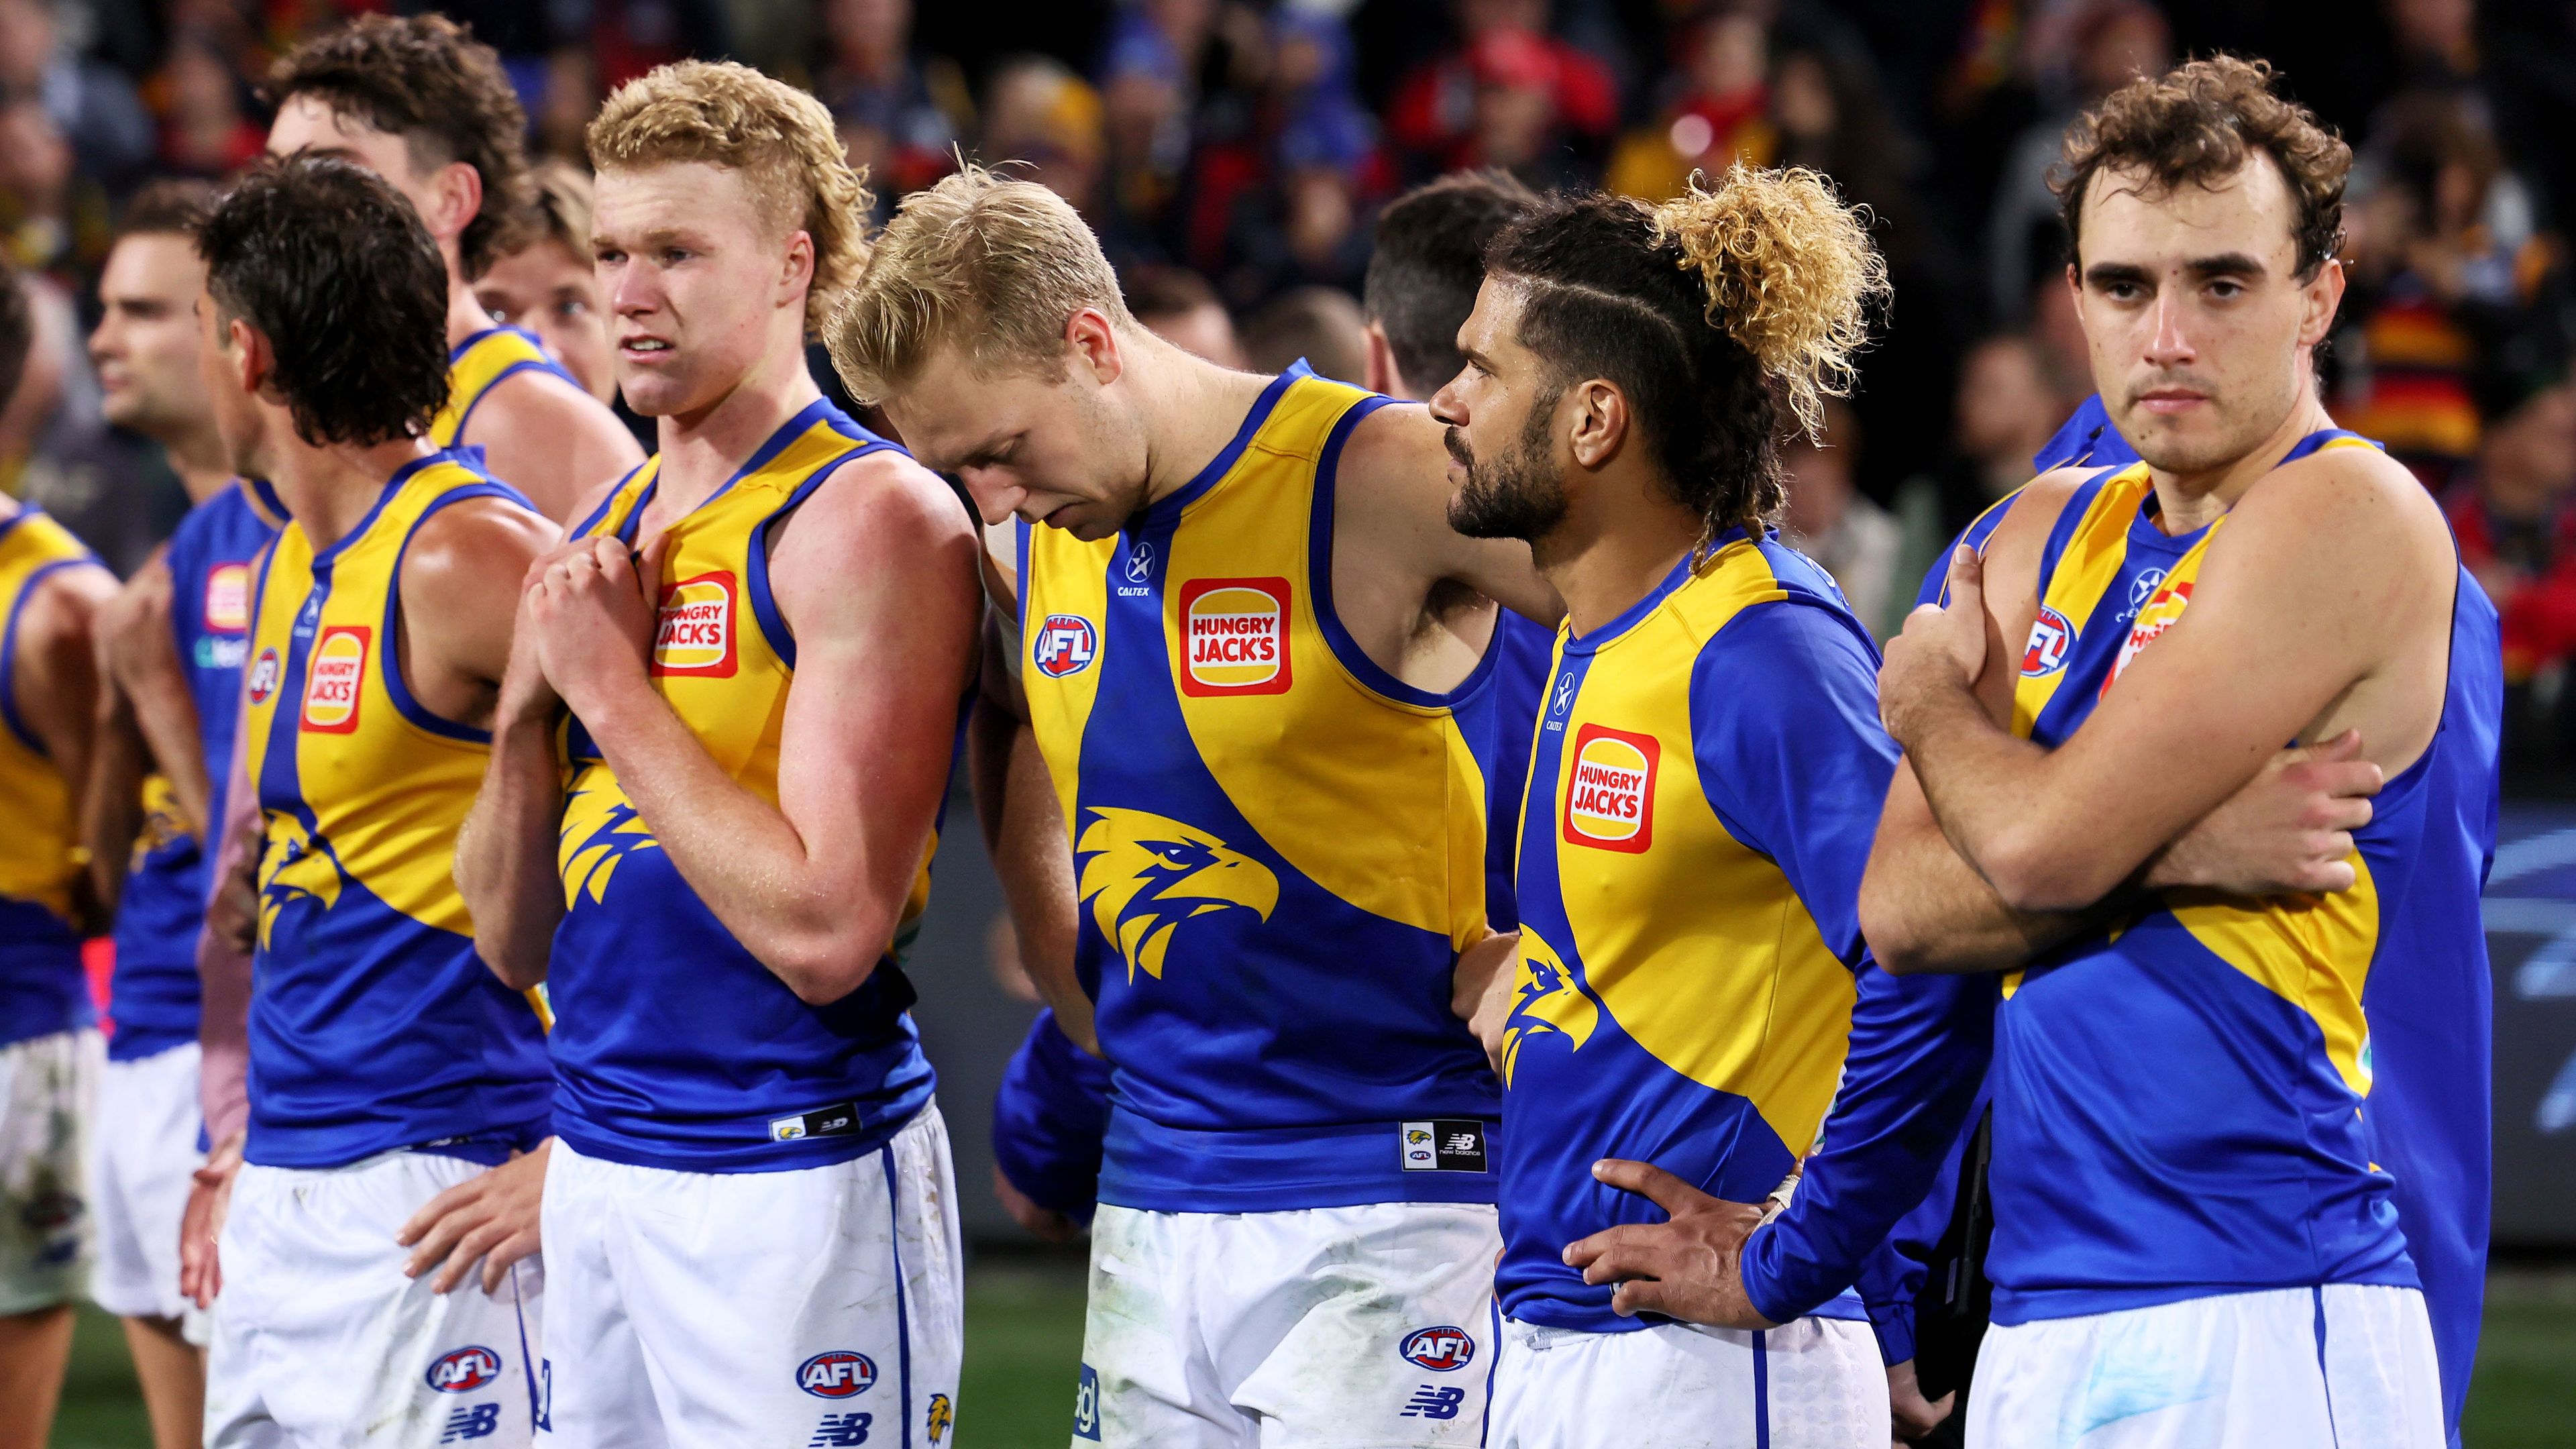 ADELAIDE, AUSTRALIA - JUNE 10: The Eagles after their loss during the 2023 AFL Round 13 match between the Adelaide Crows and the West Coast Eagles at Adelaide Oval on June 10, 2023 in Adelaide, Australia. (Photo by James Elsby/AFL Photos via Getty Images)